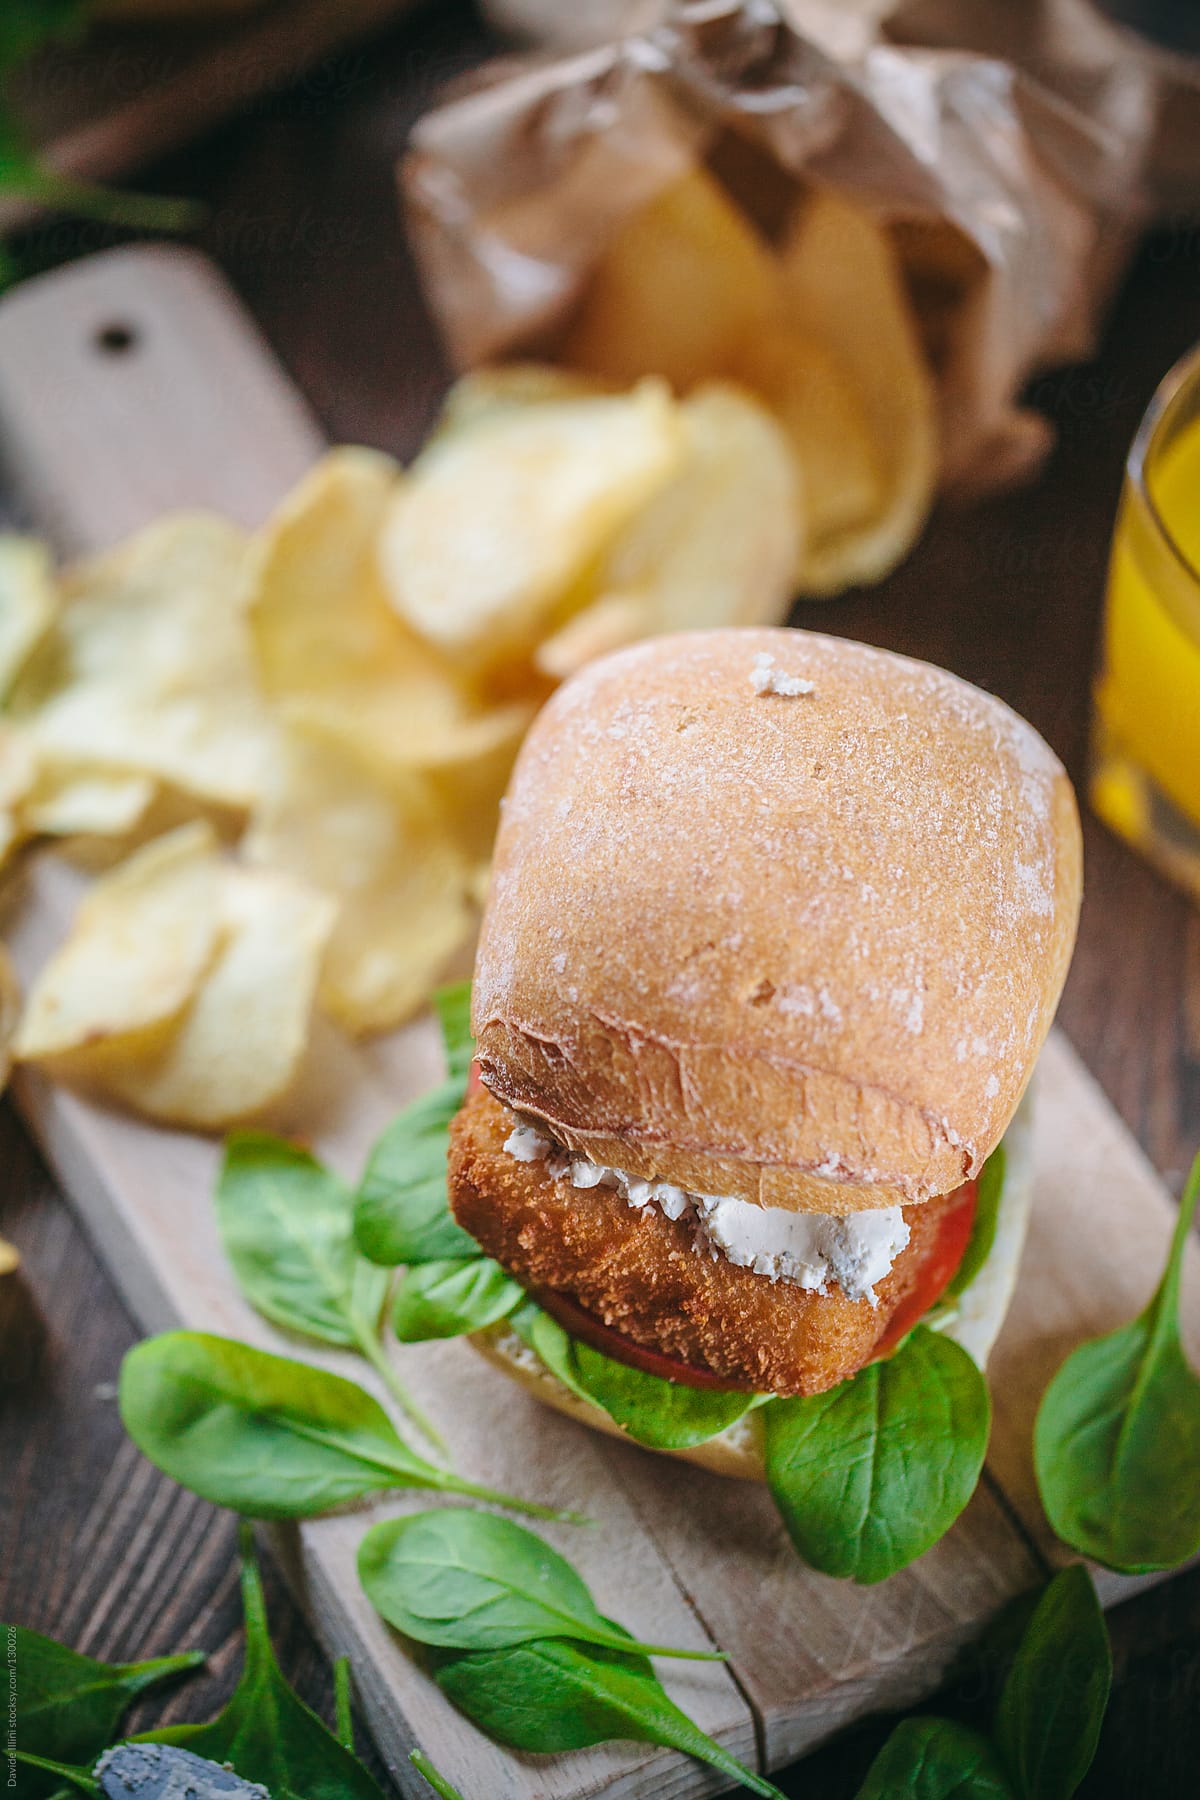 Fish burger with chips